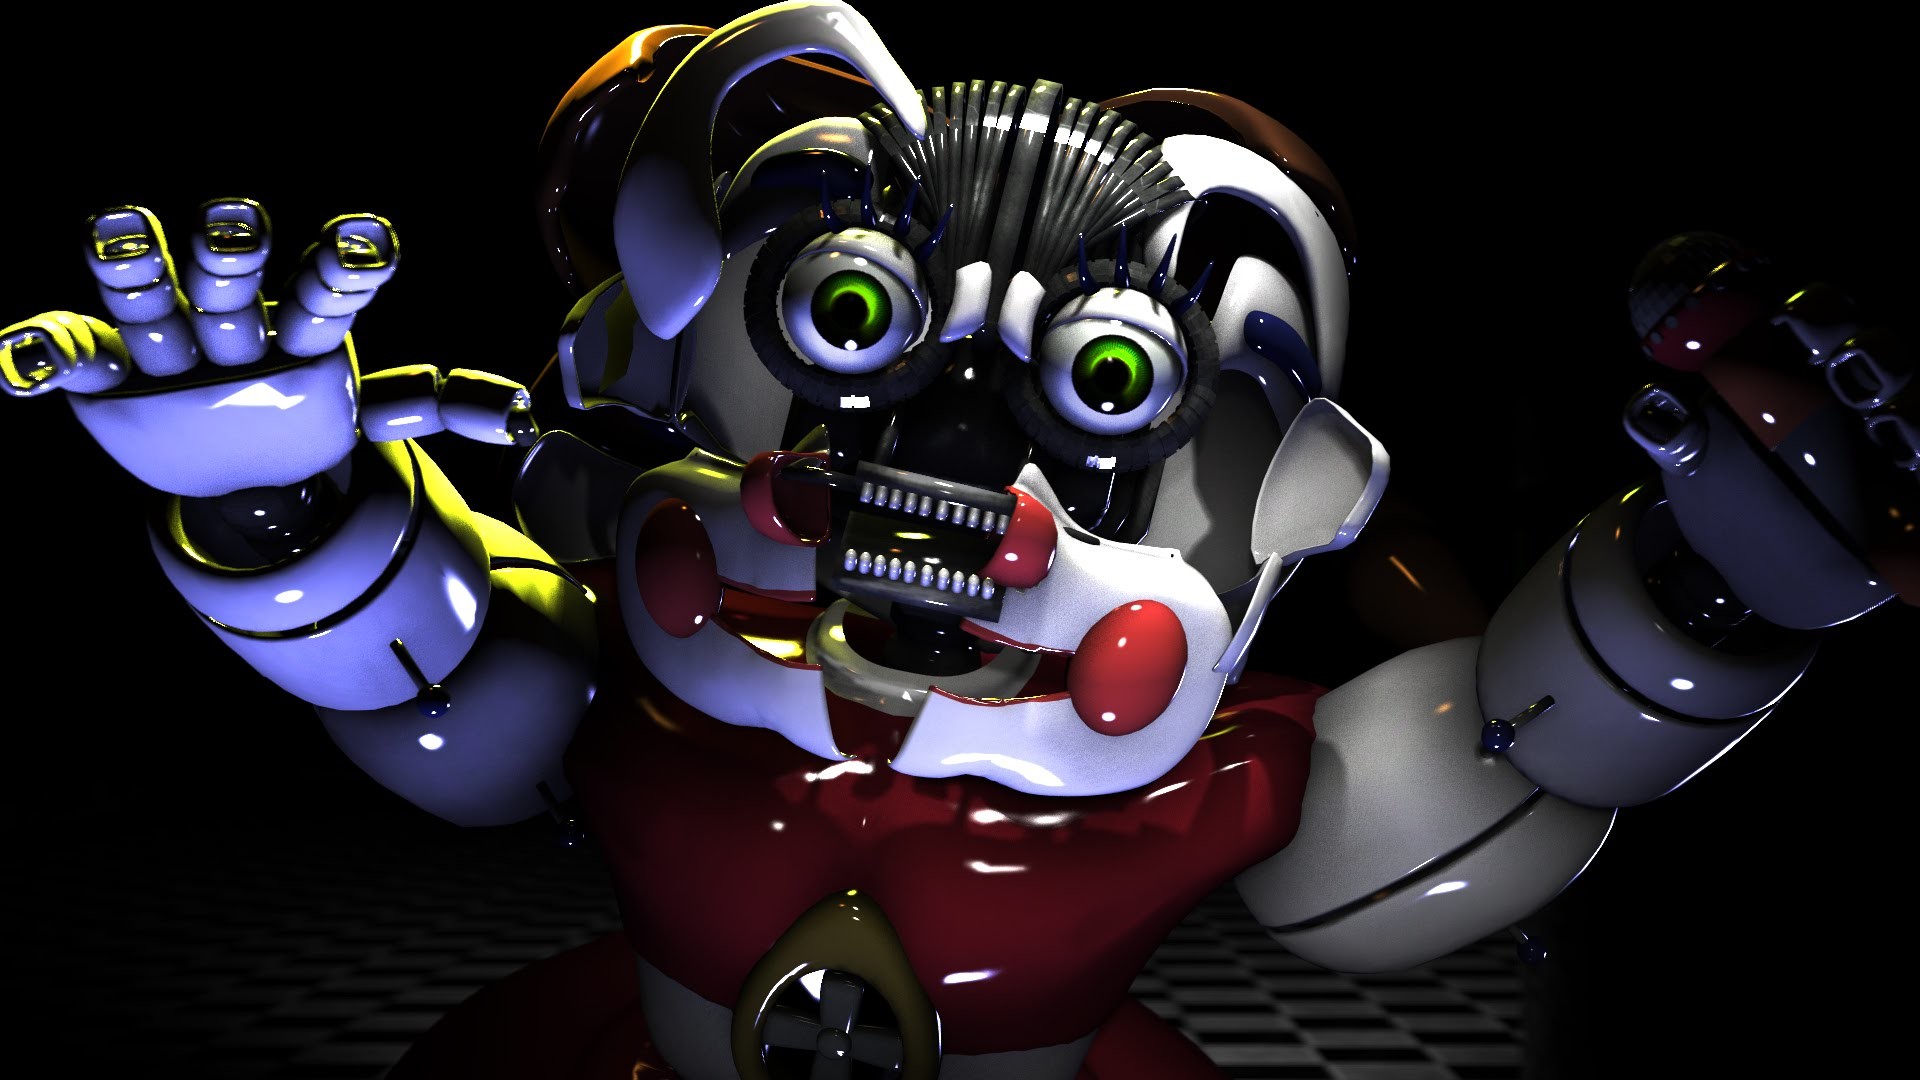 1920x1080 Five Nights At Freddy's: Sister Location Could Be Delayed For Being Too  Scary